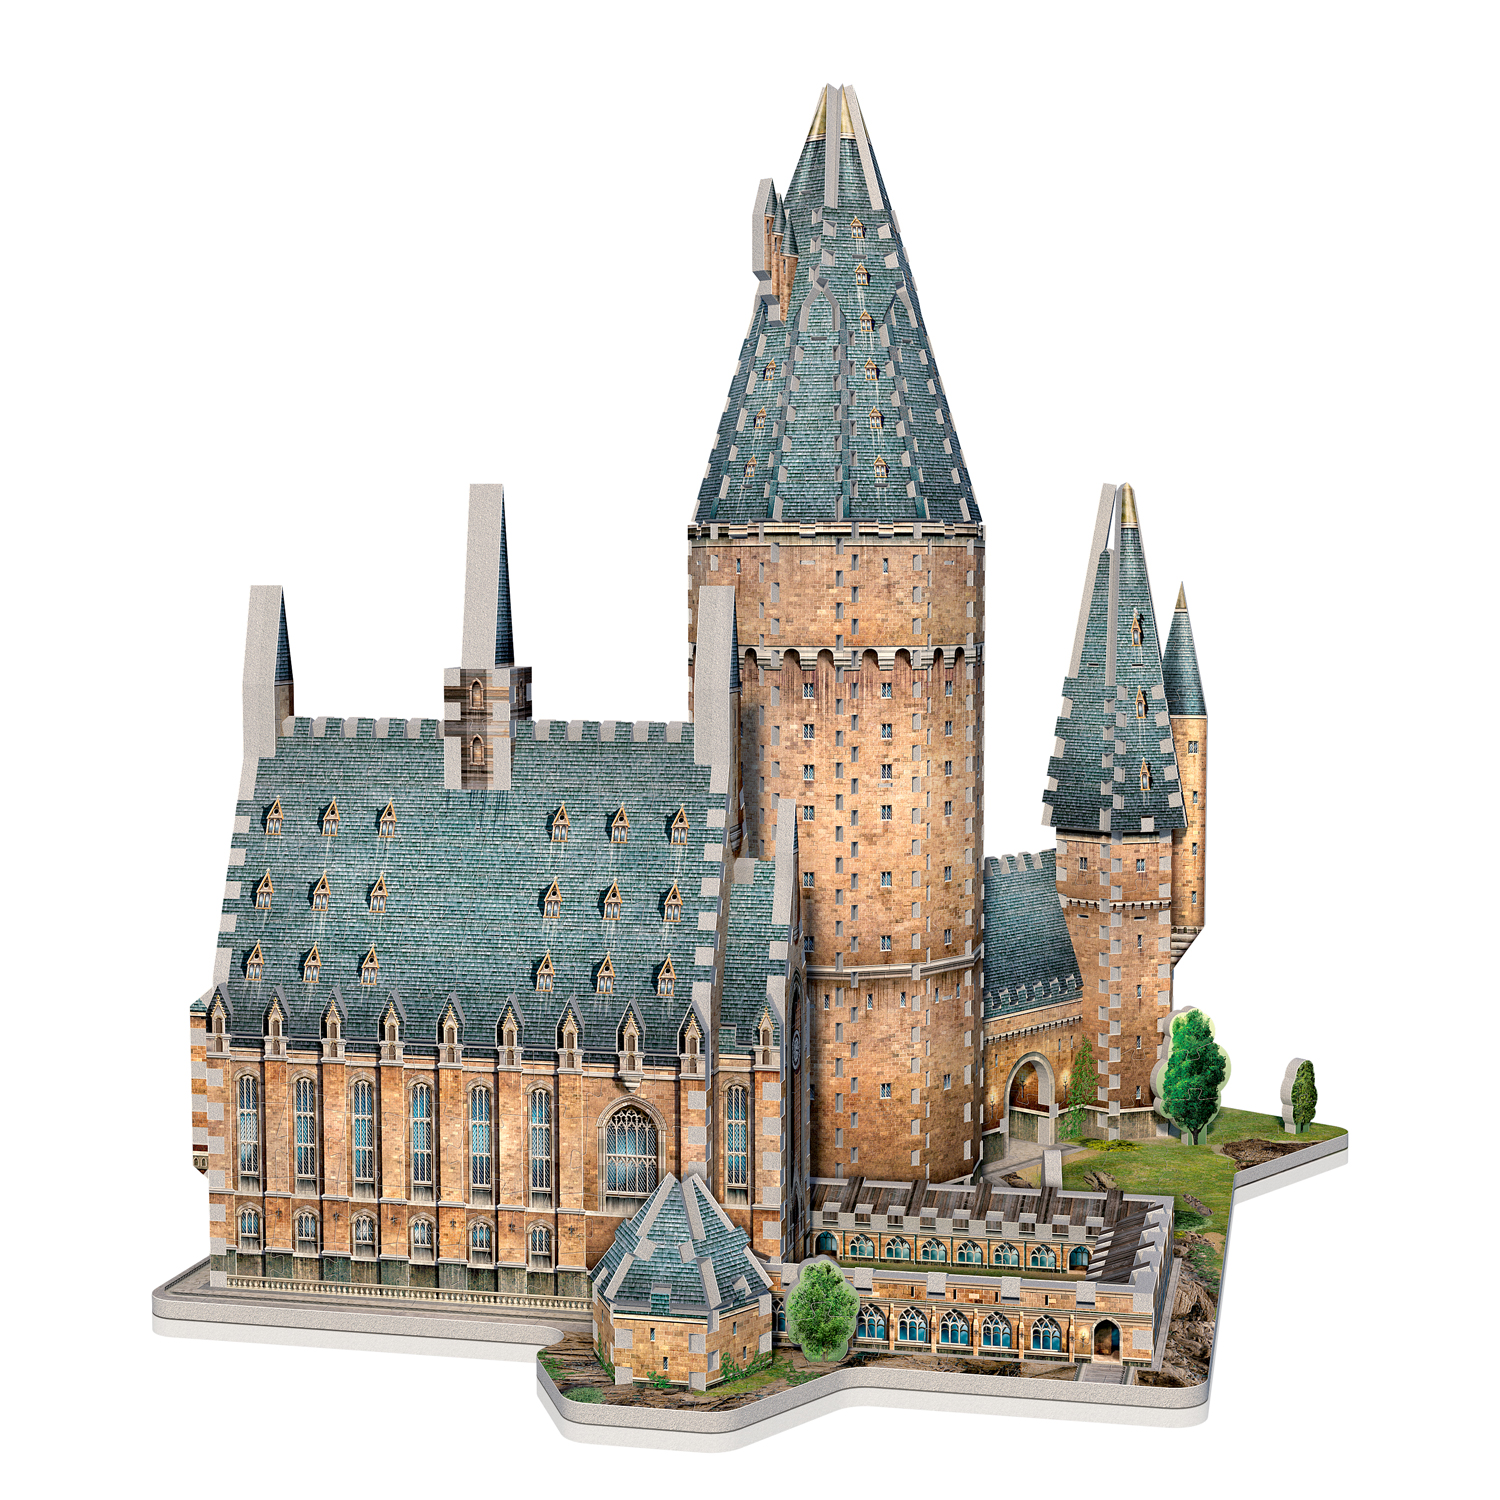 Wrebbit Harry Potter Hogwarts Great Hall 850 Pieces 3D Puzzle NEW 